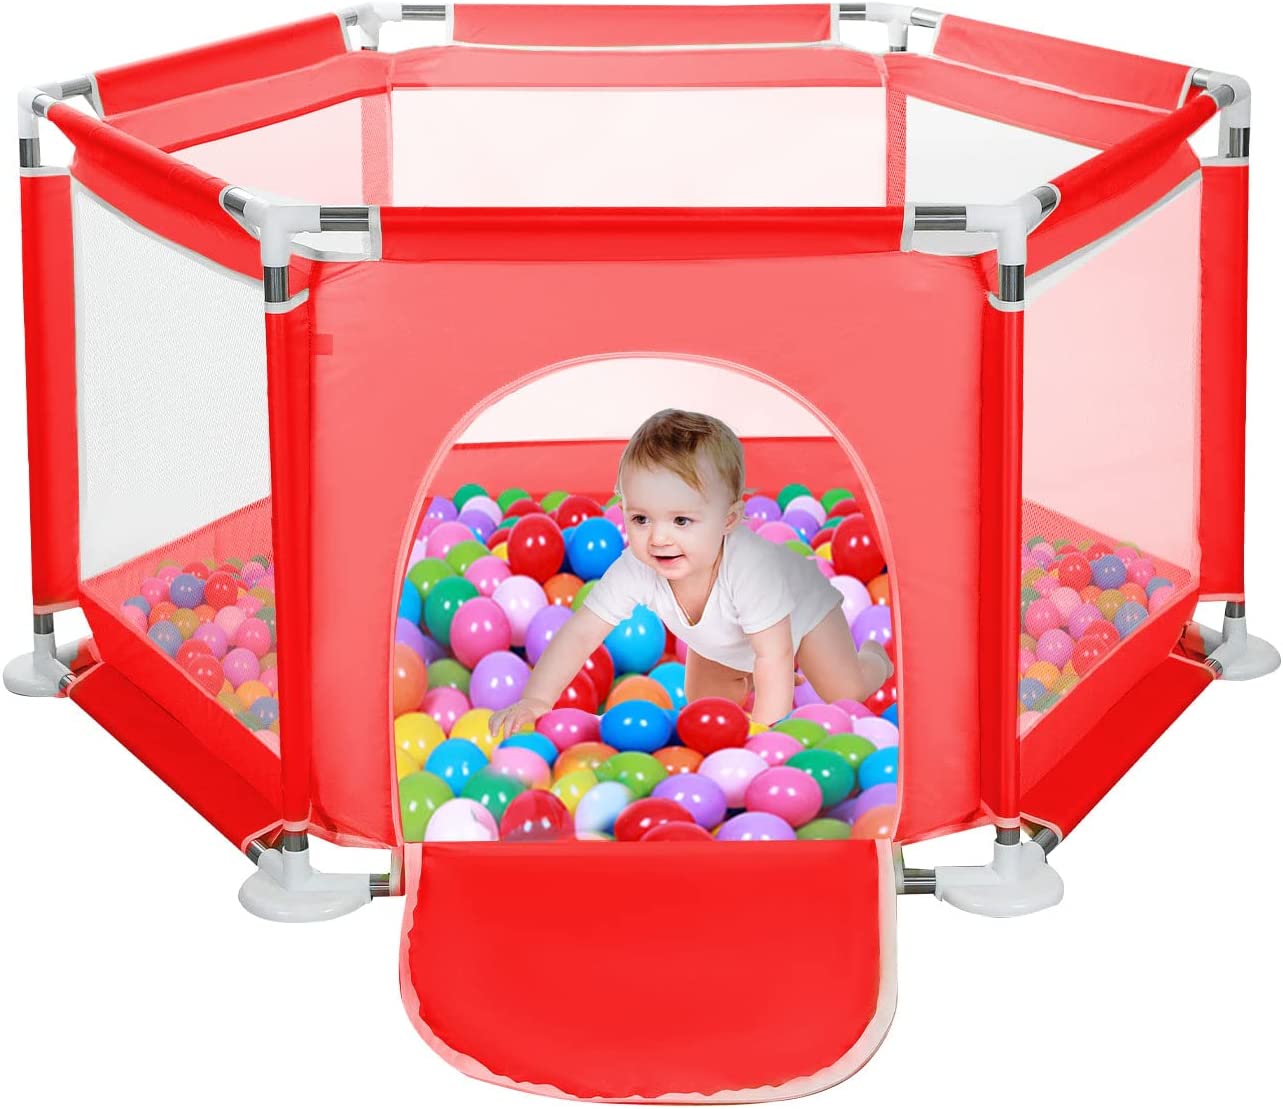 Durable Baby Fence Plastic without ocean ball - Buy Durable Baby Fence Plastic without ocean ball in Dubai - HOCC Dubai - Baby playground outdoor - Shop baby product - Shop Pet product - shop home decor and lighting in Dubai - HOCC Dubai - Baby playgrou